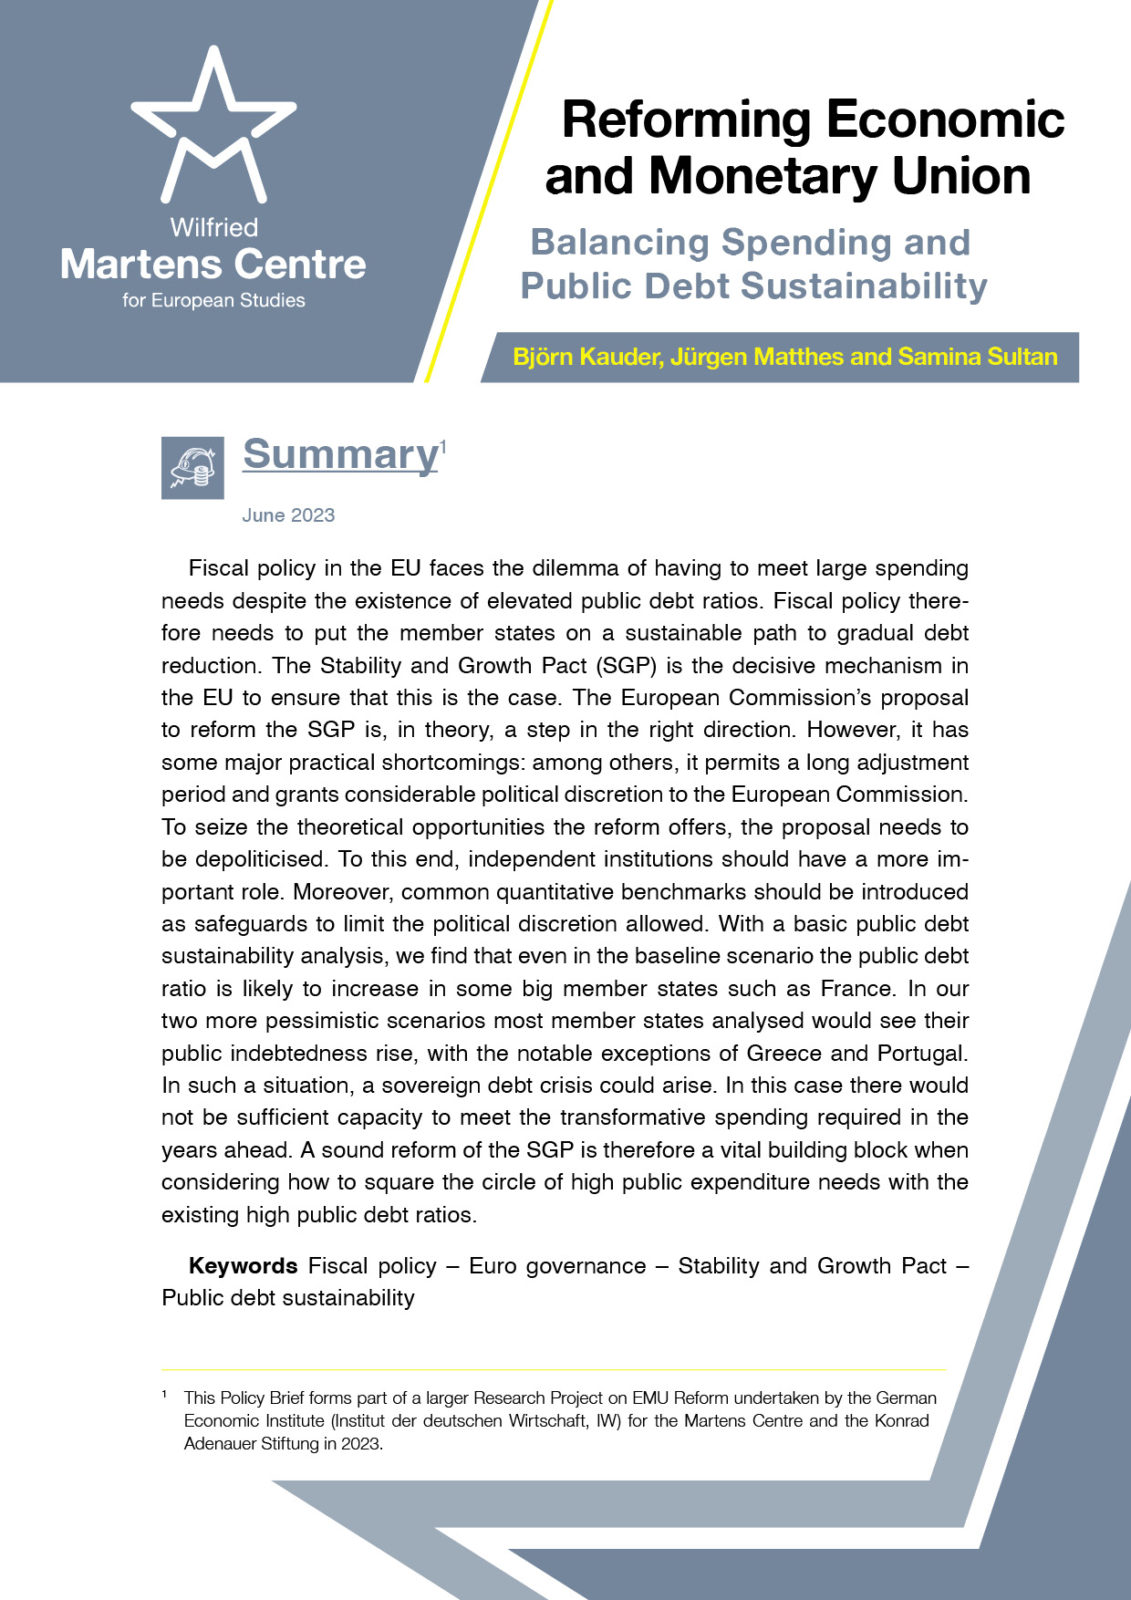 Reforming Economic and Monetary Union: Balancing Spending and Public Debt Sustainability